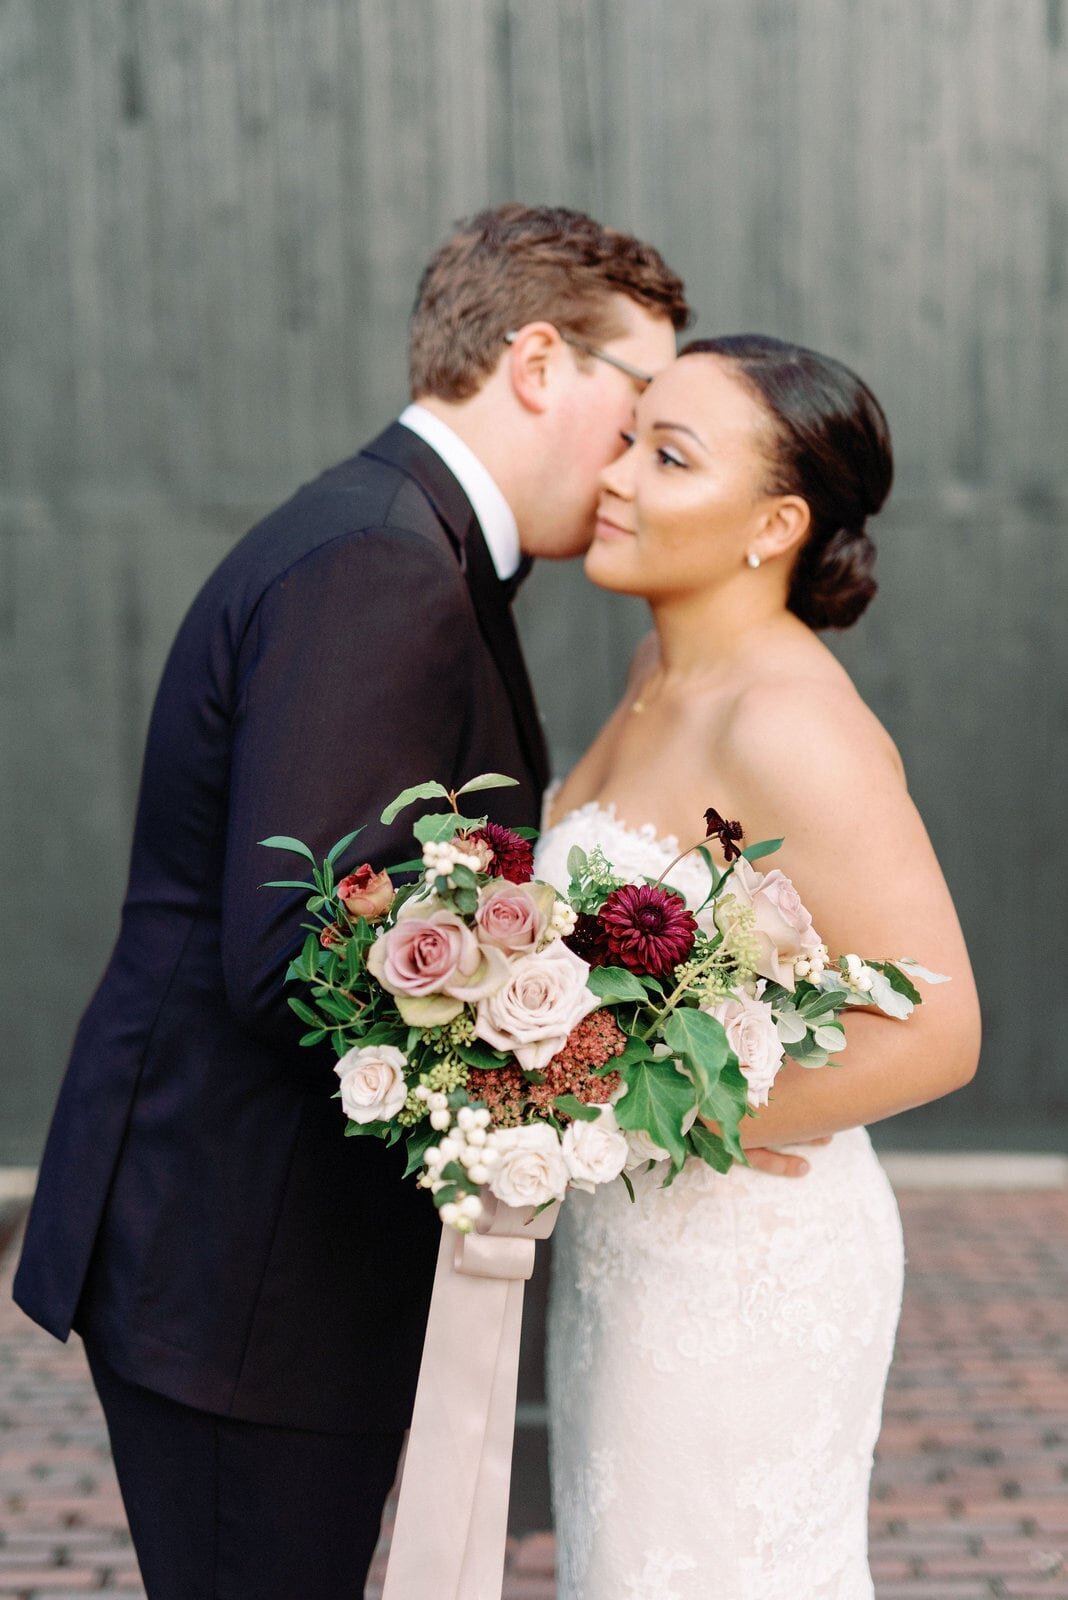 Modern Editorial Couples Portraits Steam Whistle Brewery Wedding  Toronto Wedding Venue Jacqueline James Photography